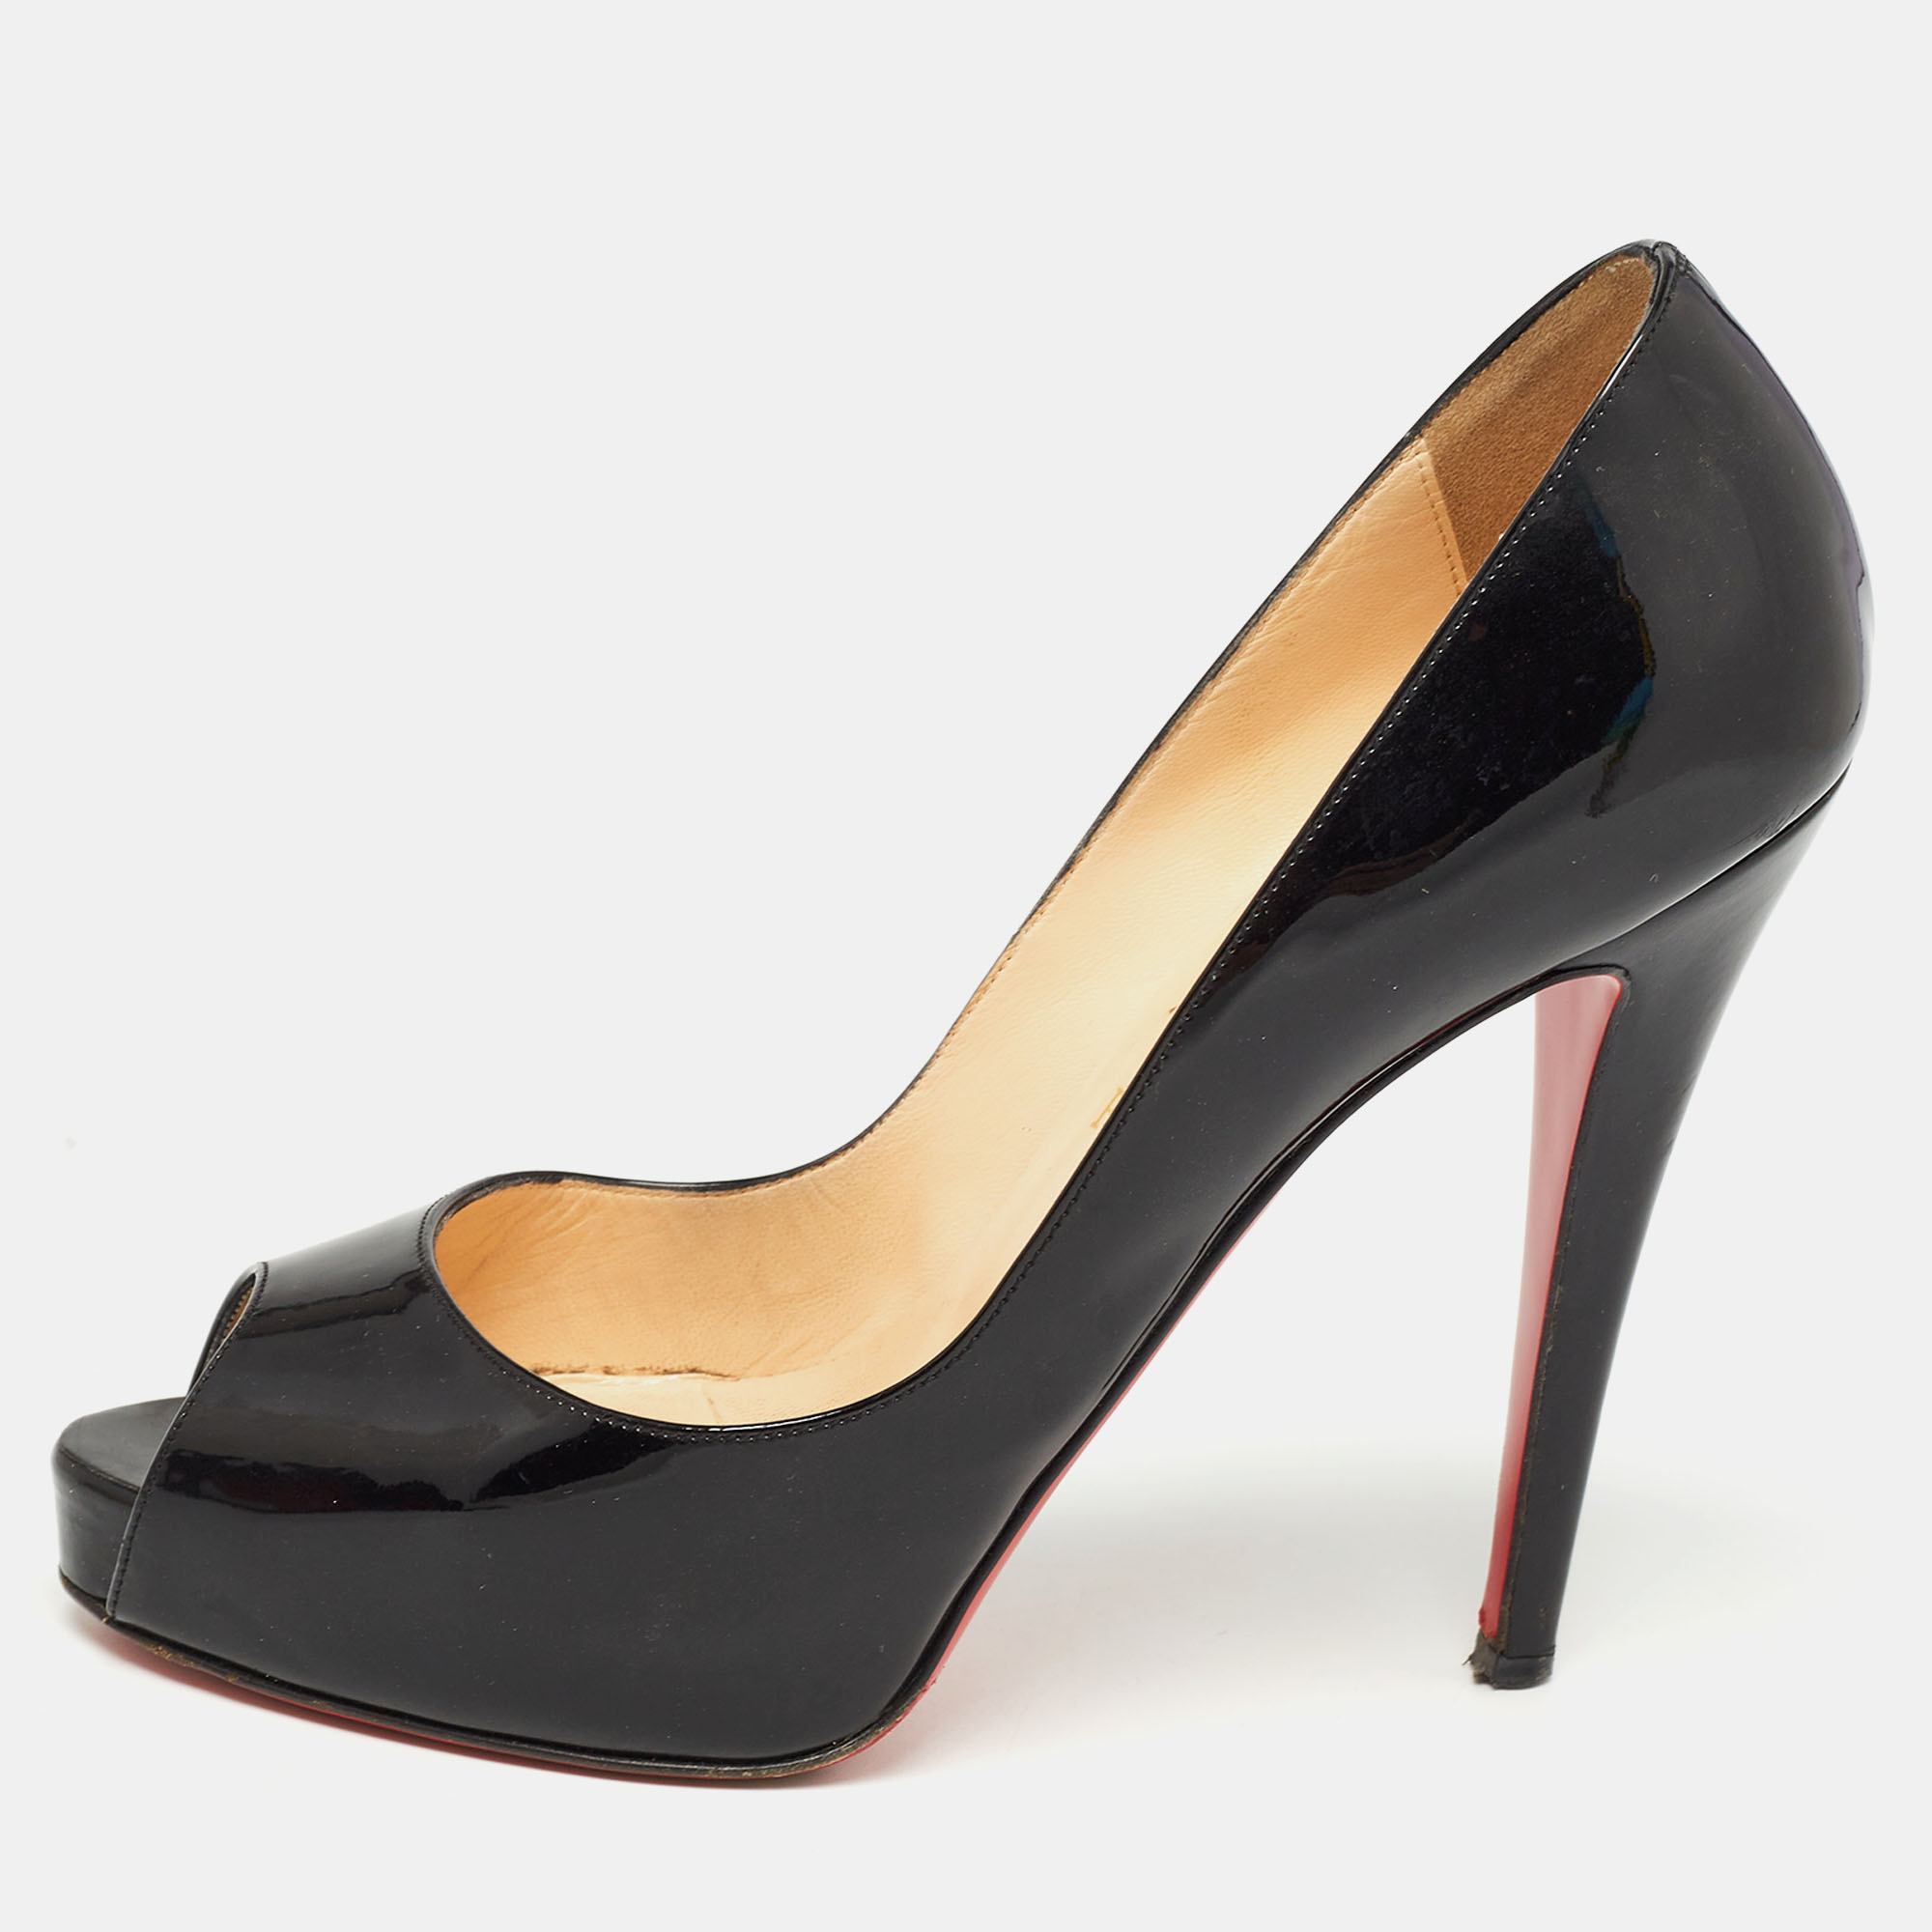 Pre-owned Christian Louboutin Black Patent Leather Very Prive Pumps Size 39